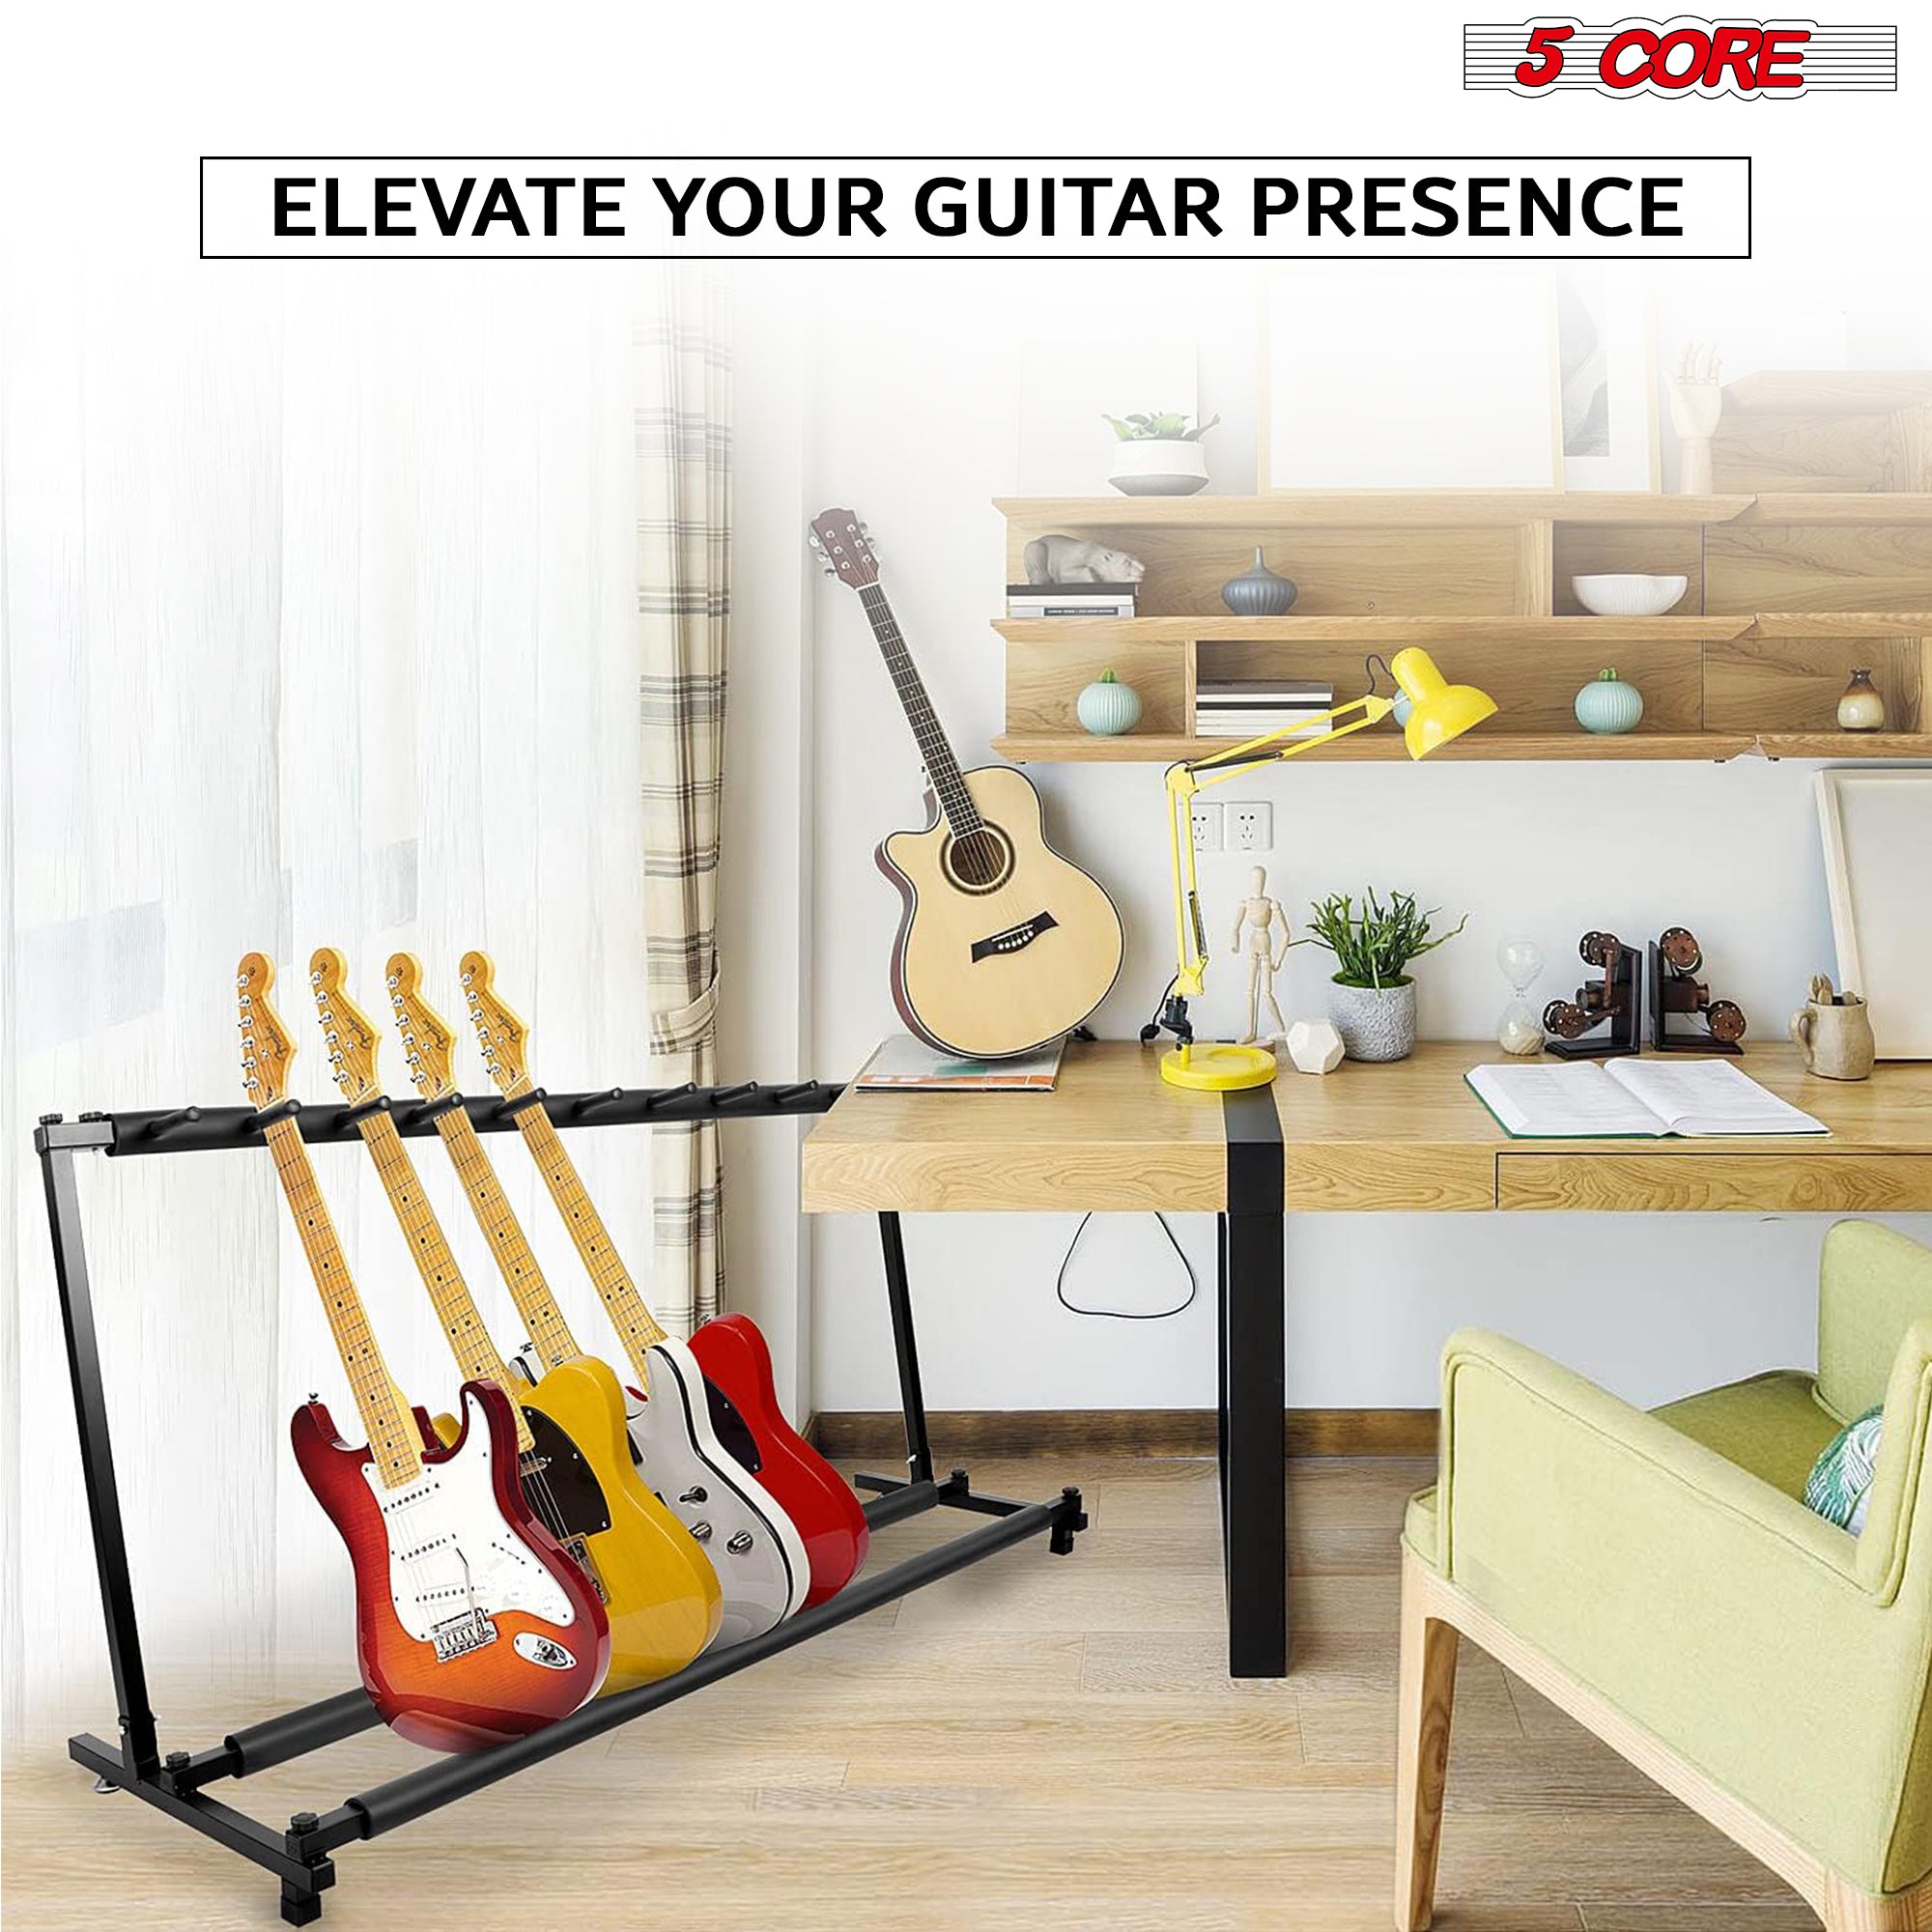 5 Core Guitar Stand 9 Space Rack for Acoustic Electric Bass Guitar • Foam Padded Multi Guitar Holder